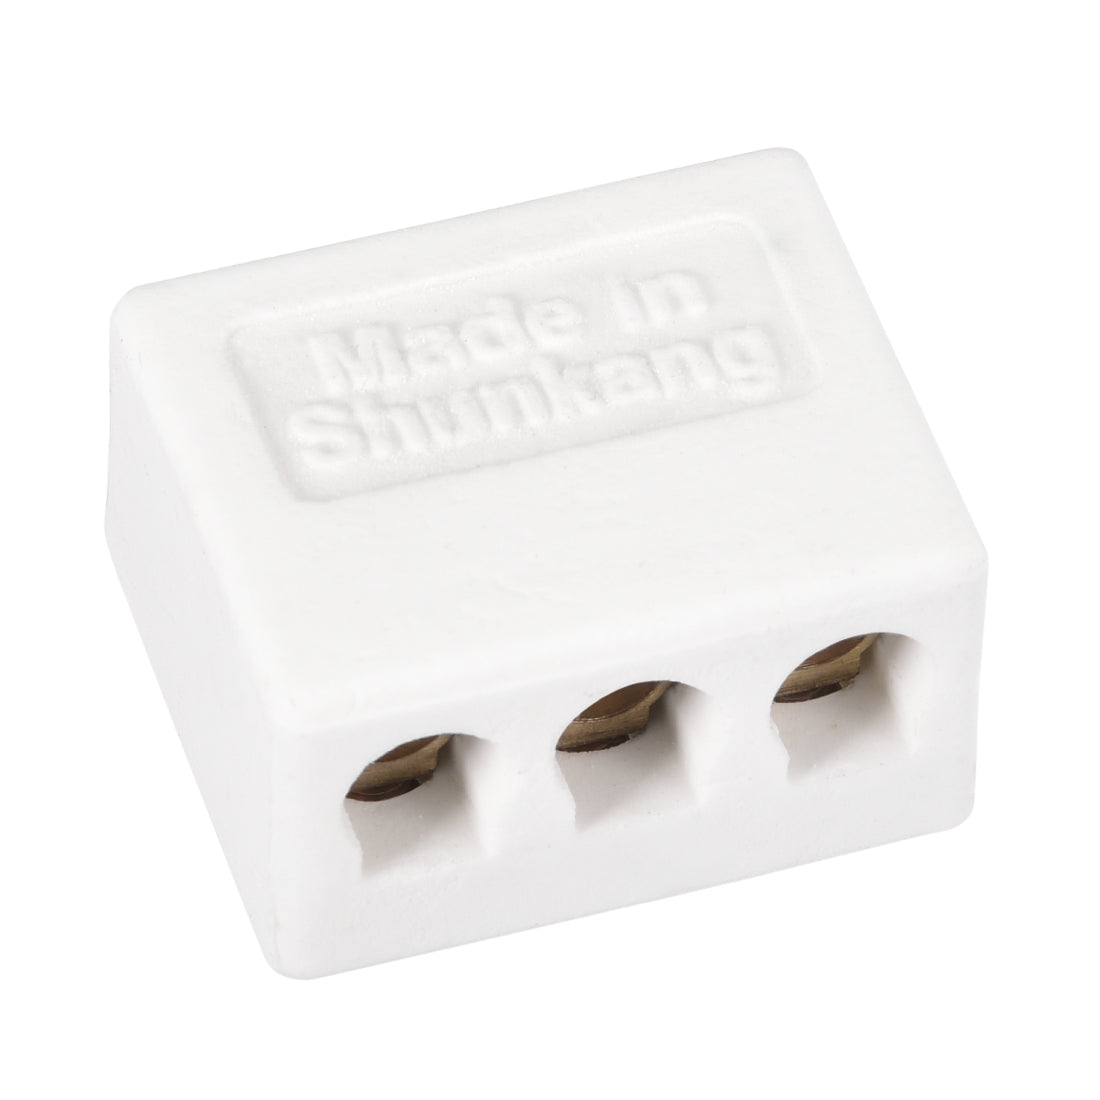 uxcell Uxcell 3 Way Ceramics Terminal Blocks High Temp Porcelain Ceramic Connectors 36x30x20mm for Electrical Wire Cable 5 Pcs